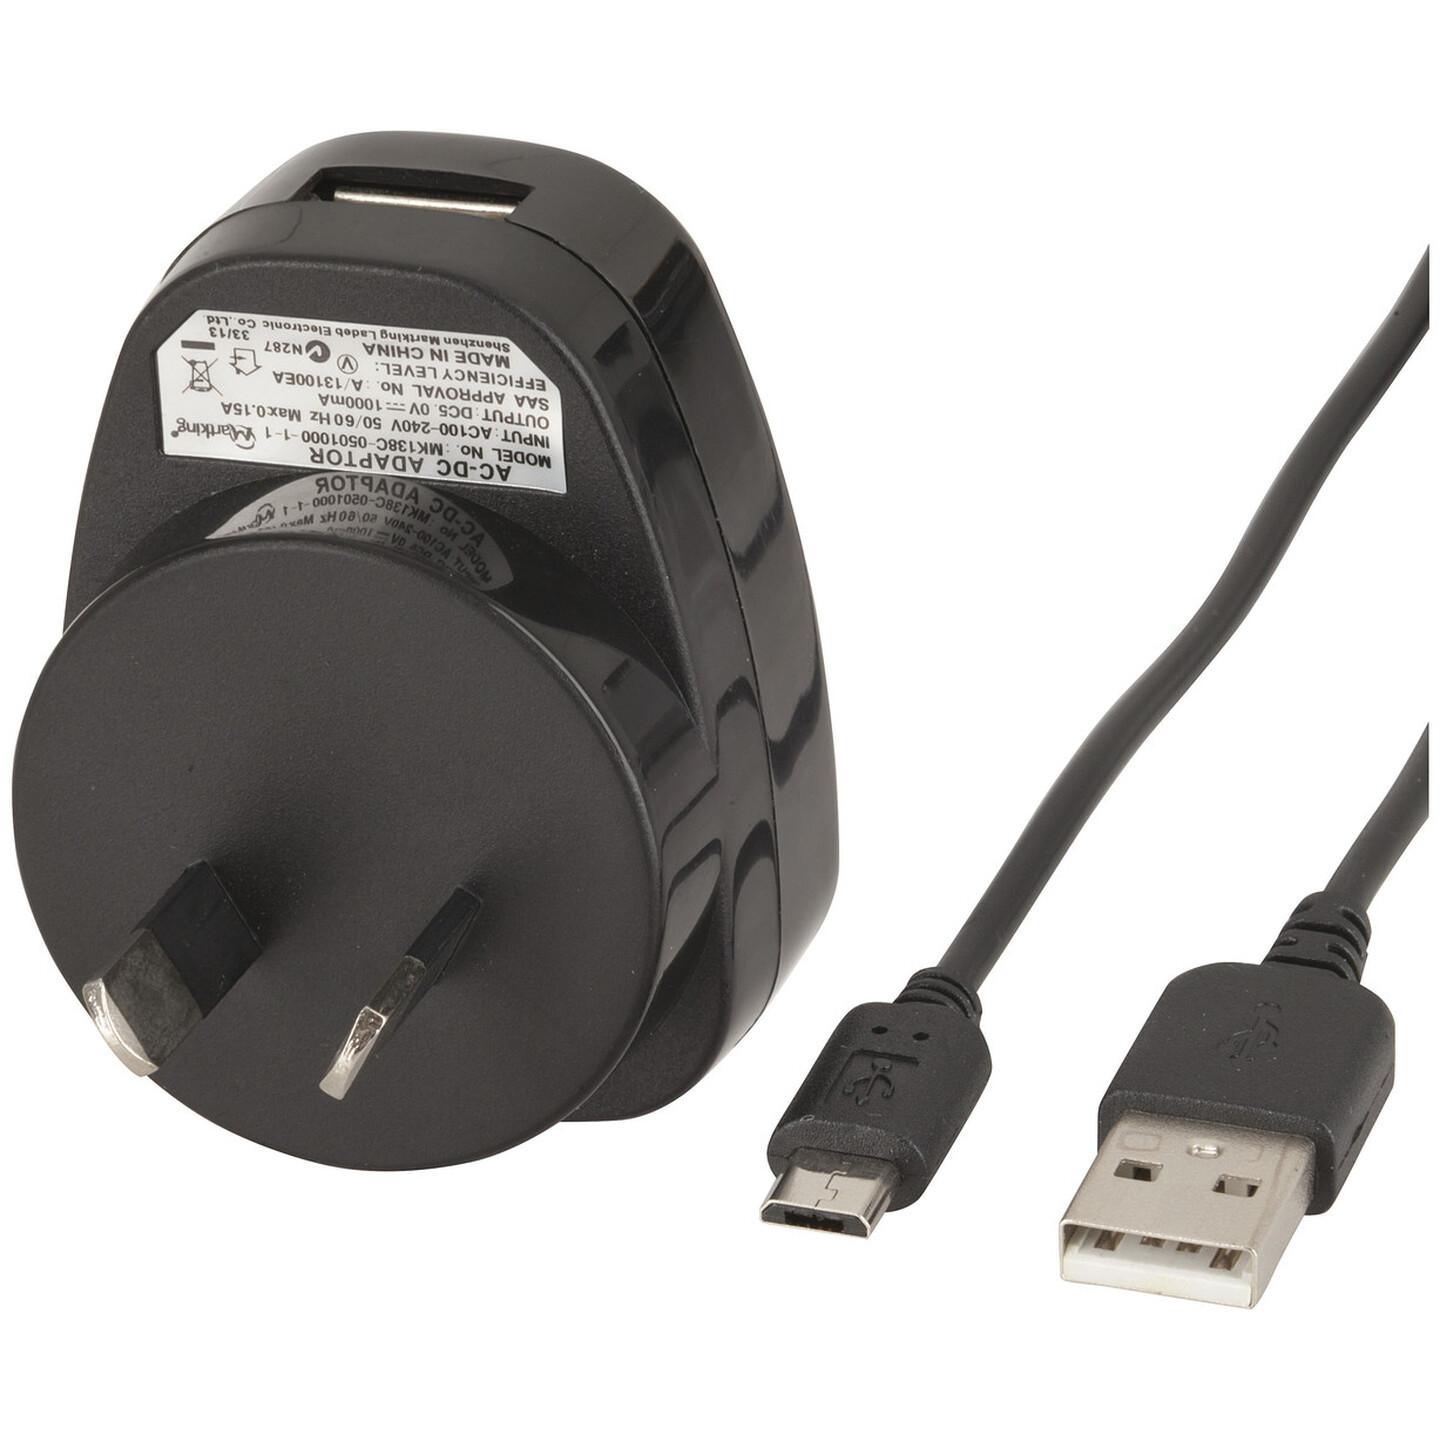 5VDC 1A USB Mains Adaptor with Micro-B Cable